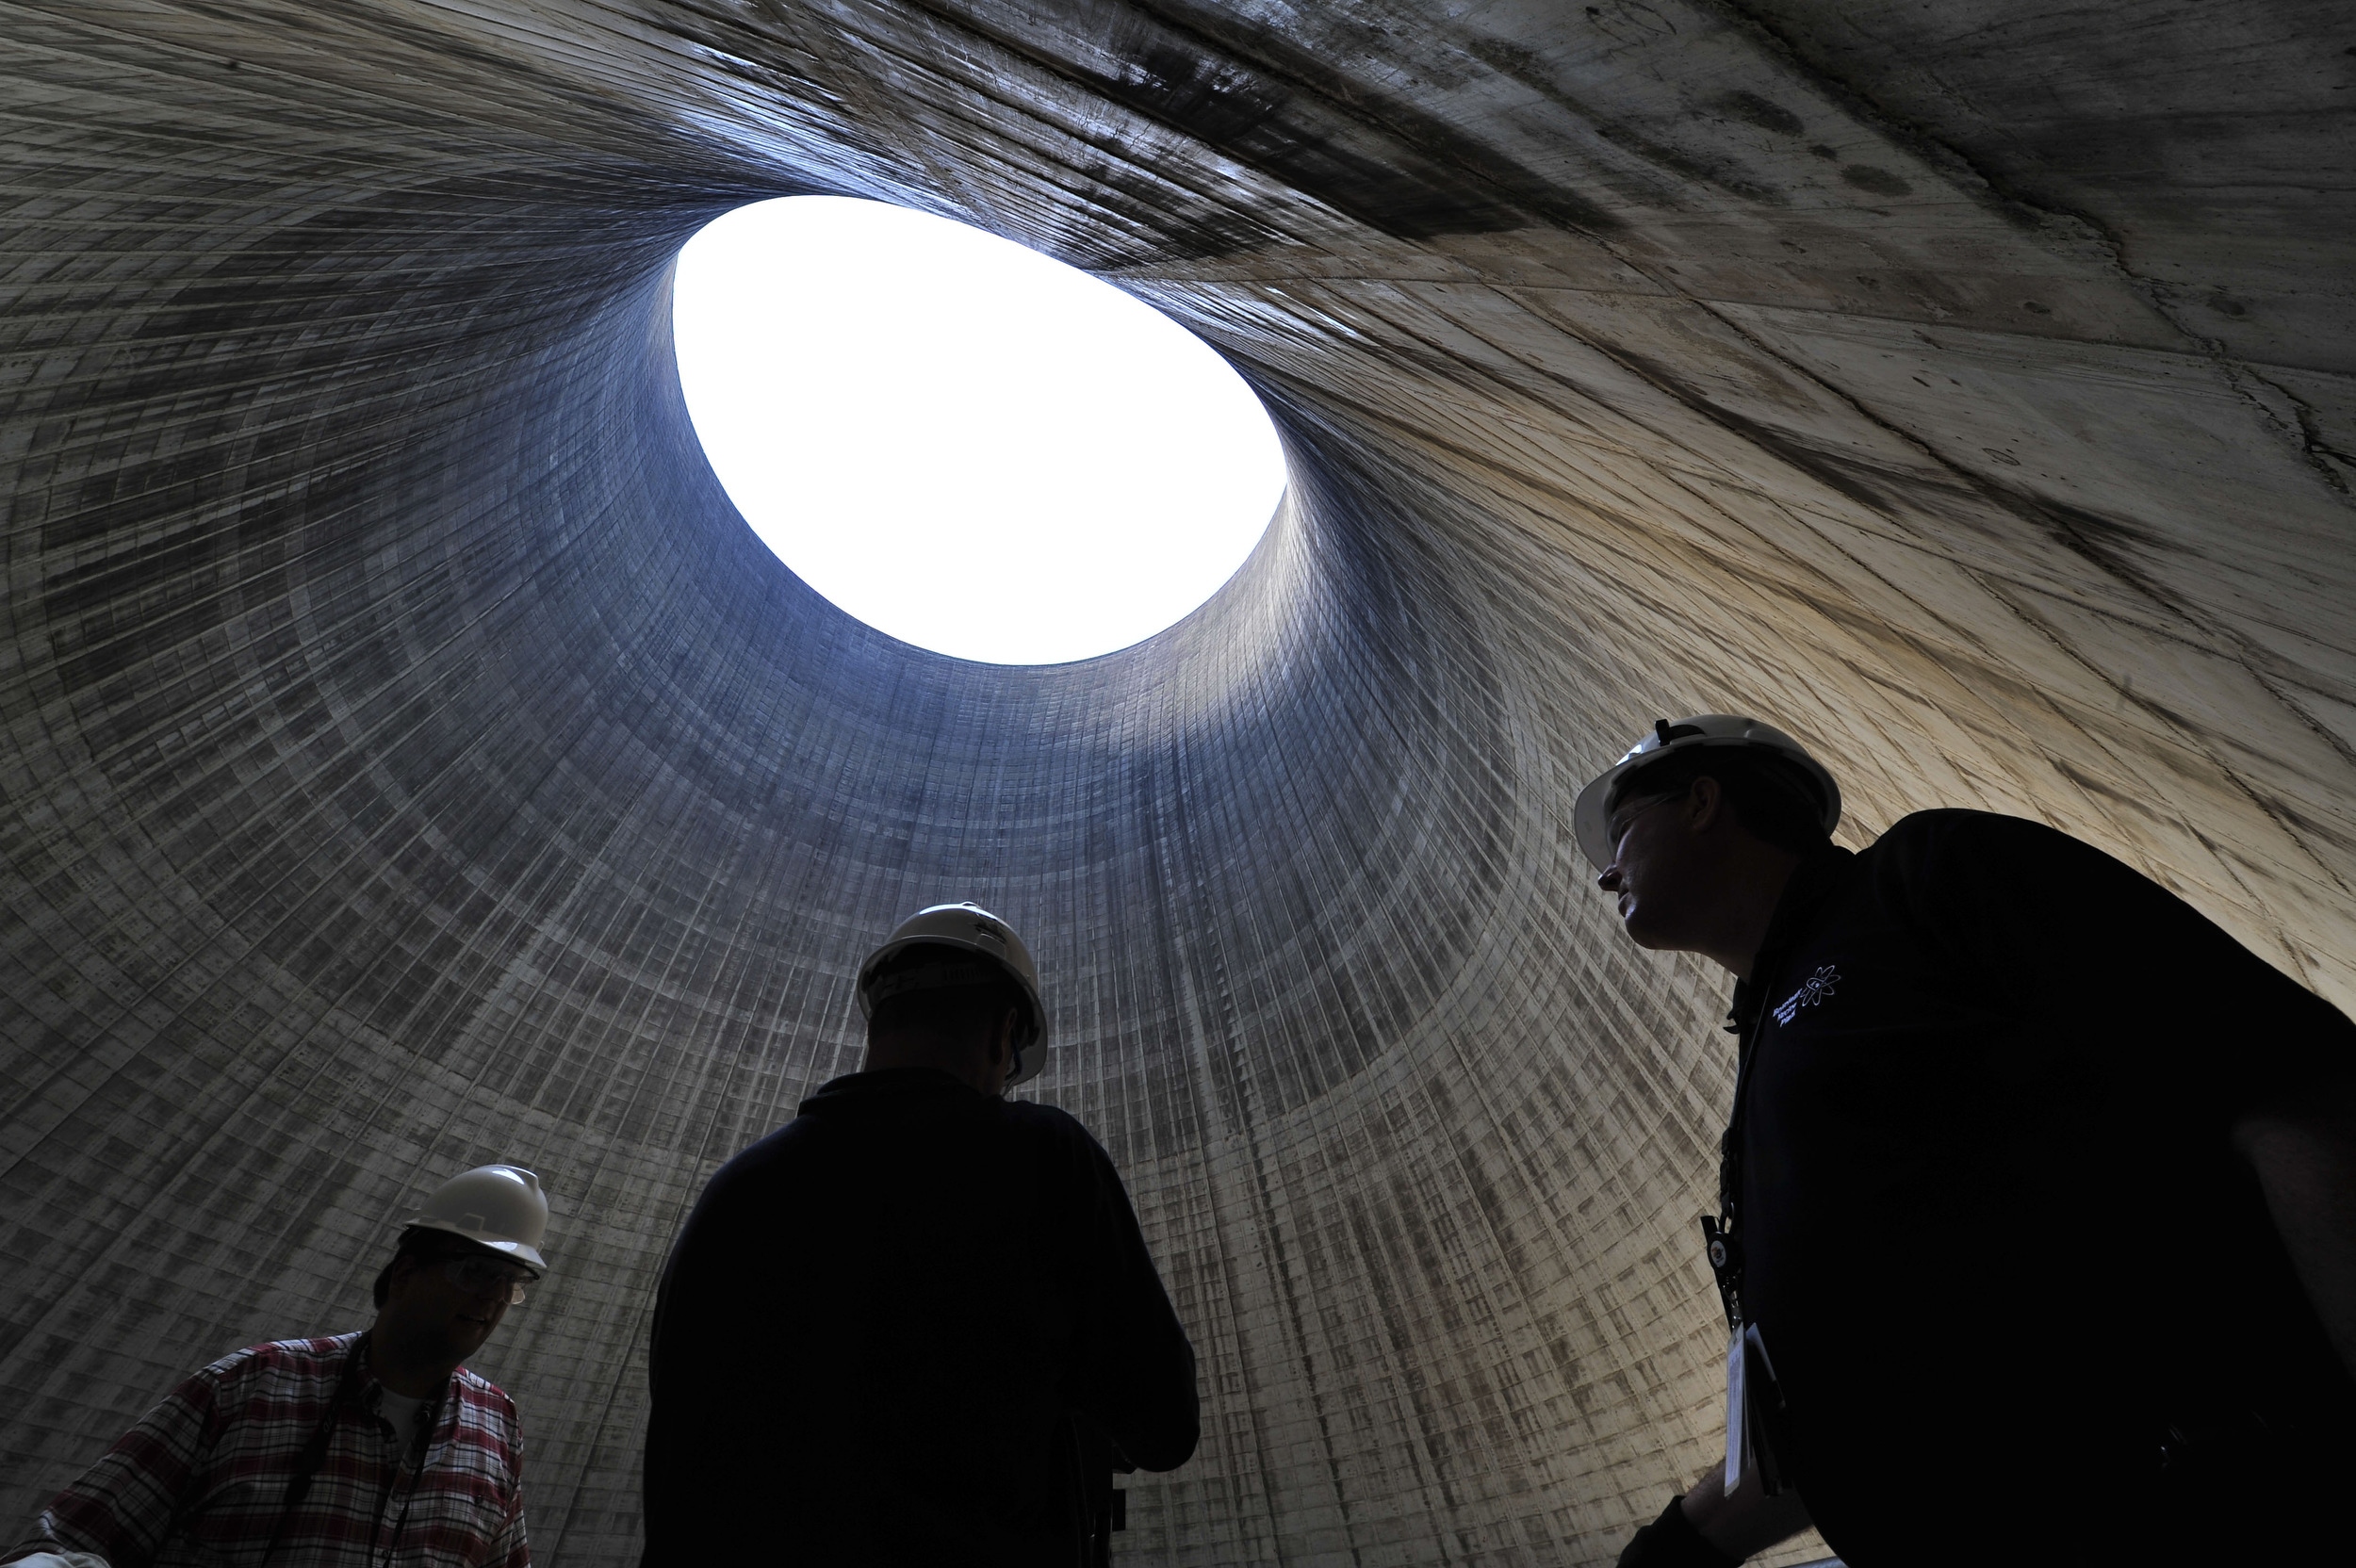  TVA employees inside the cooling tower of the non-operational Bellefonte Nuclear Power Plant June 2, 2011 in Hollywood, Alabama . 